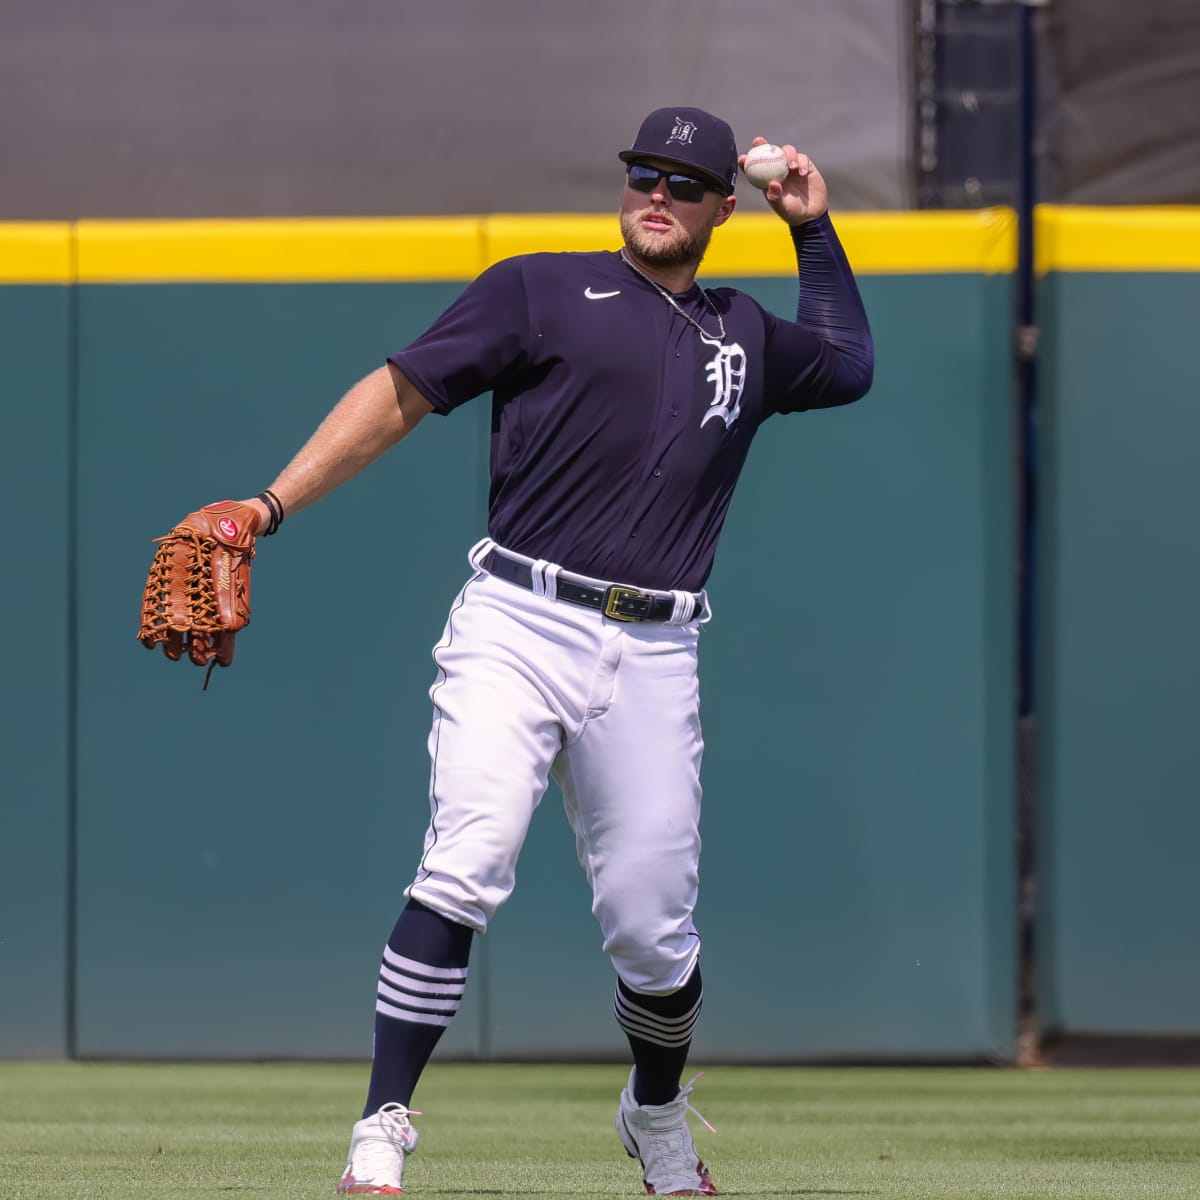 Detroit Tigers Call Up Top 10 Prospect Parker Meadows for MLB